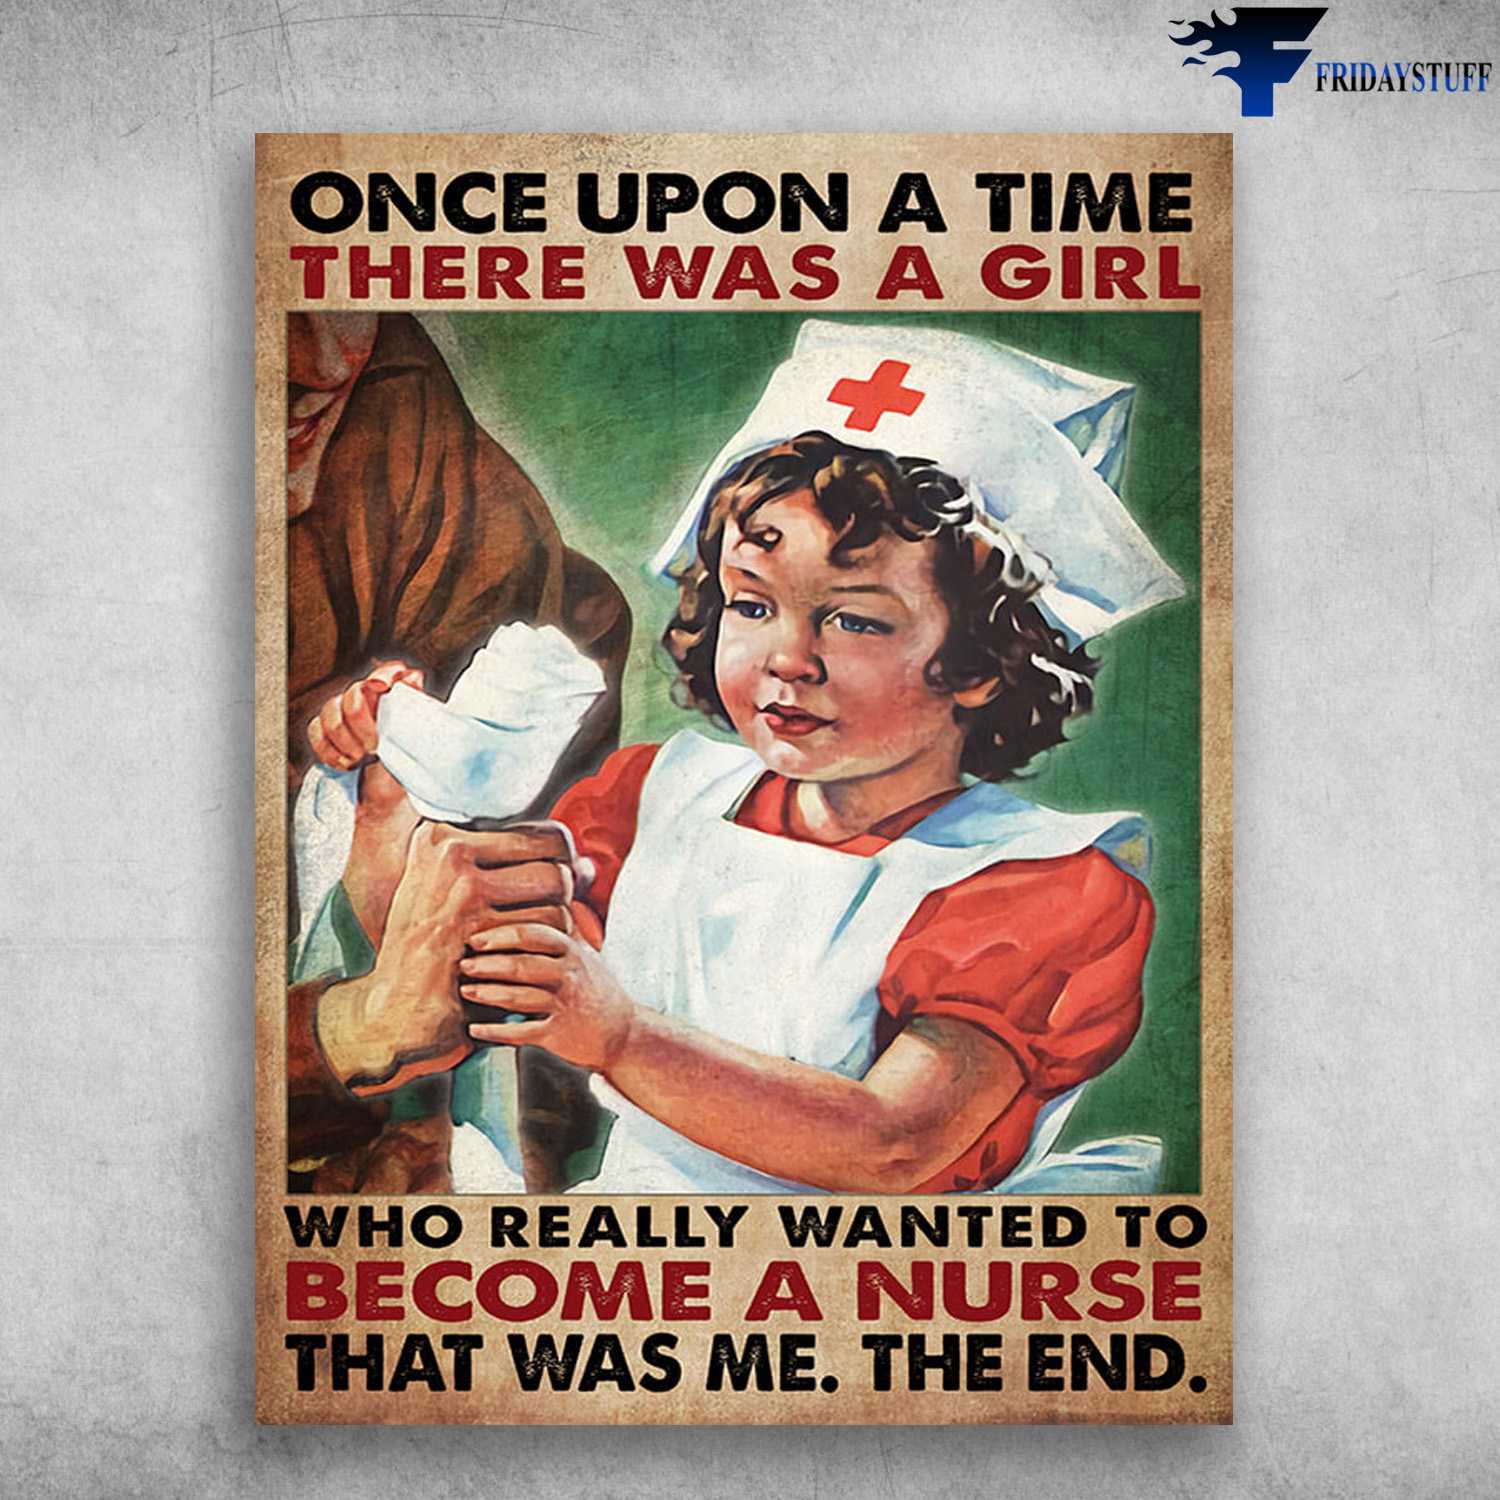 Nurse Lover, Nurse Poster - One Upon A Time, There Was A Girl, Who Really Wanted To, Become A Nurse, That Was Me, The End